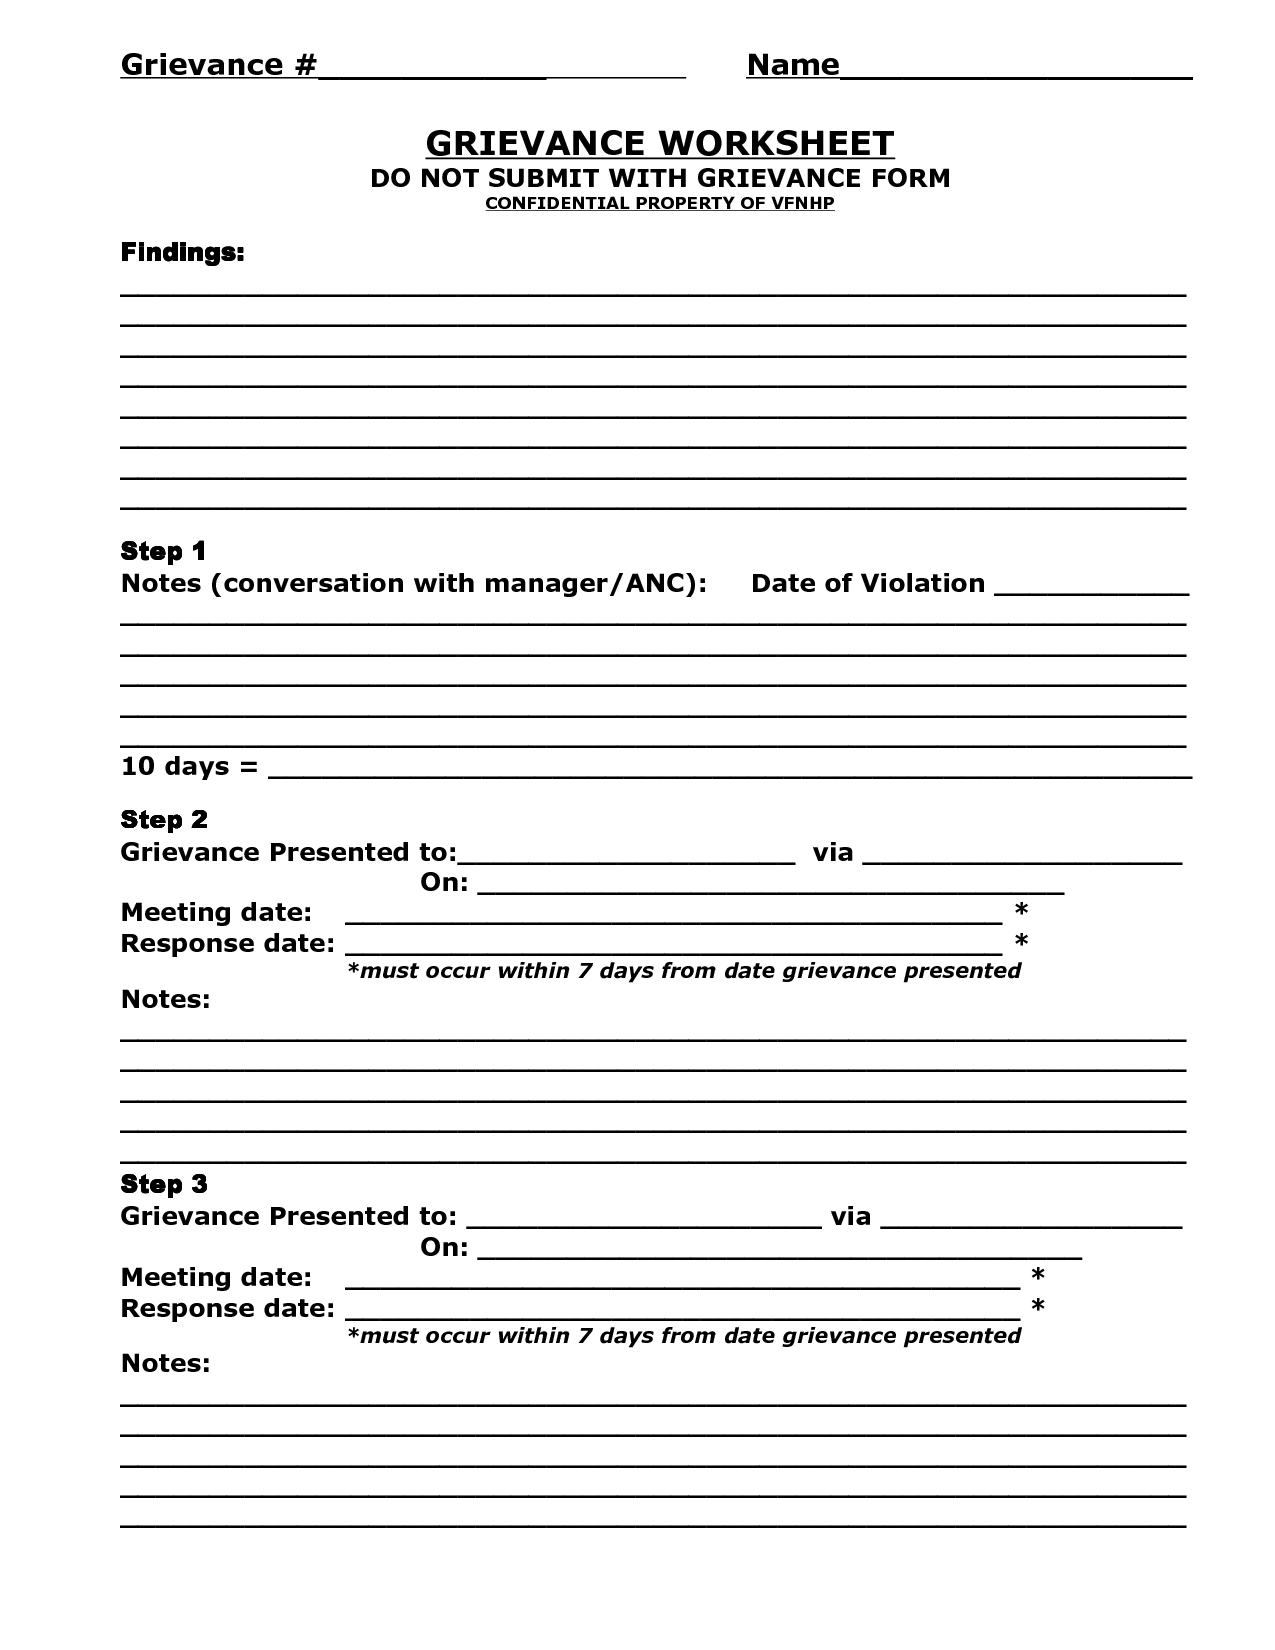 grief and loss worksheets for adults_554895